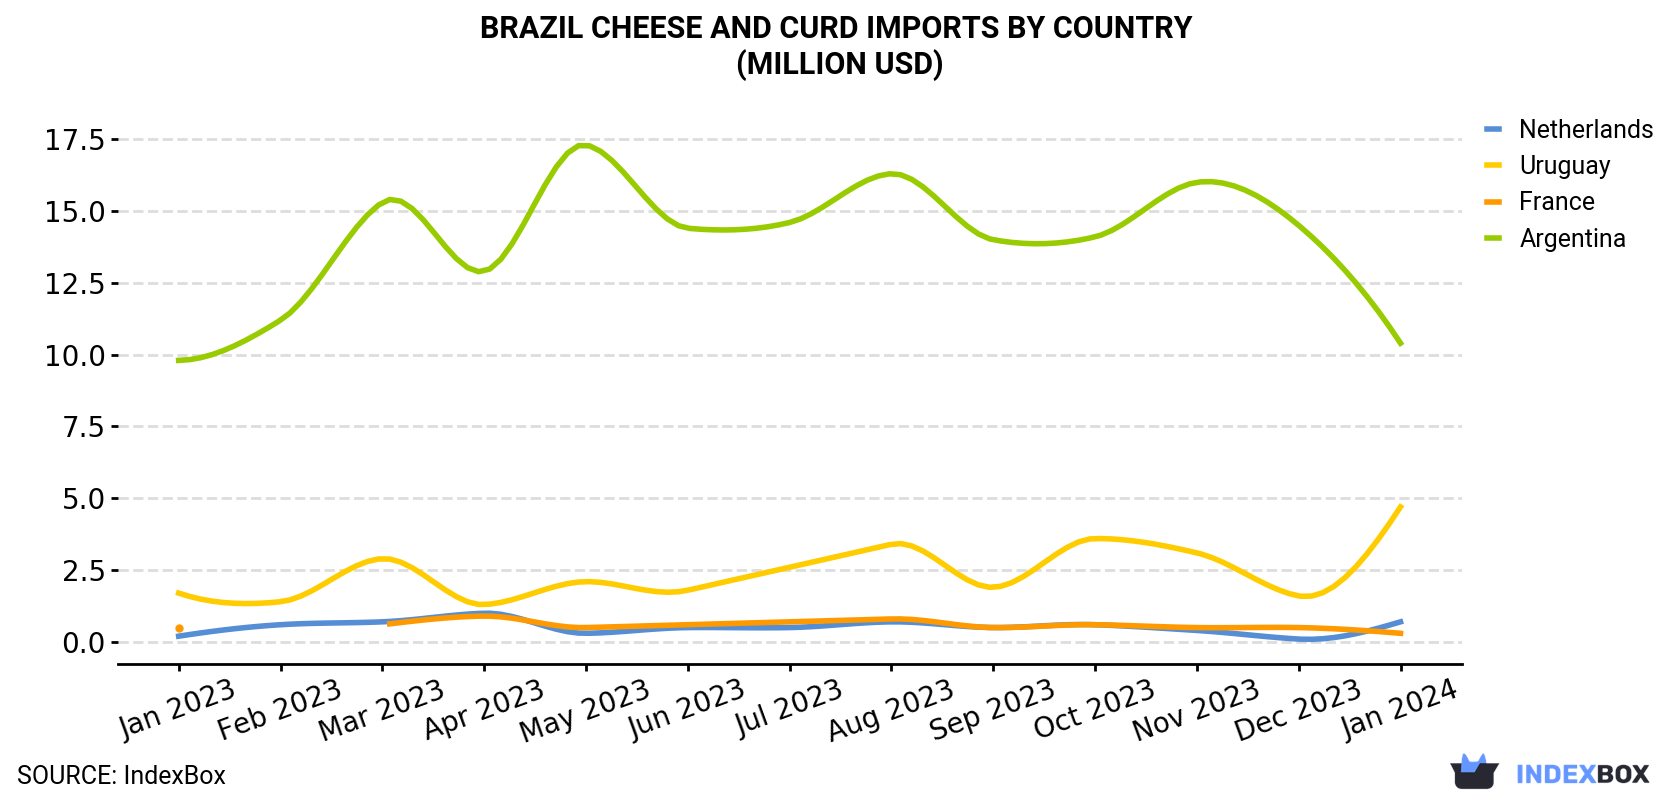 Brazil Cheese and Curd Imports By Country (Million USD)